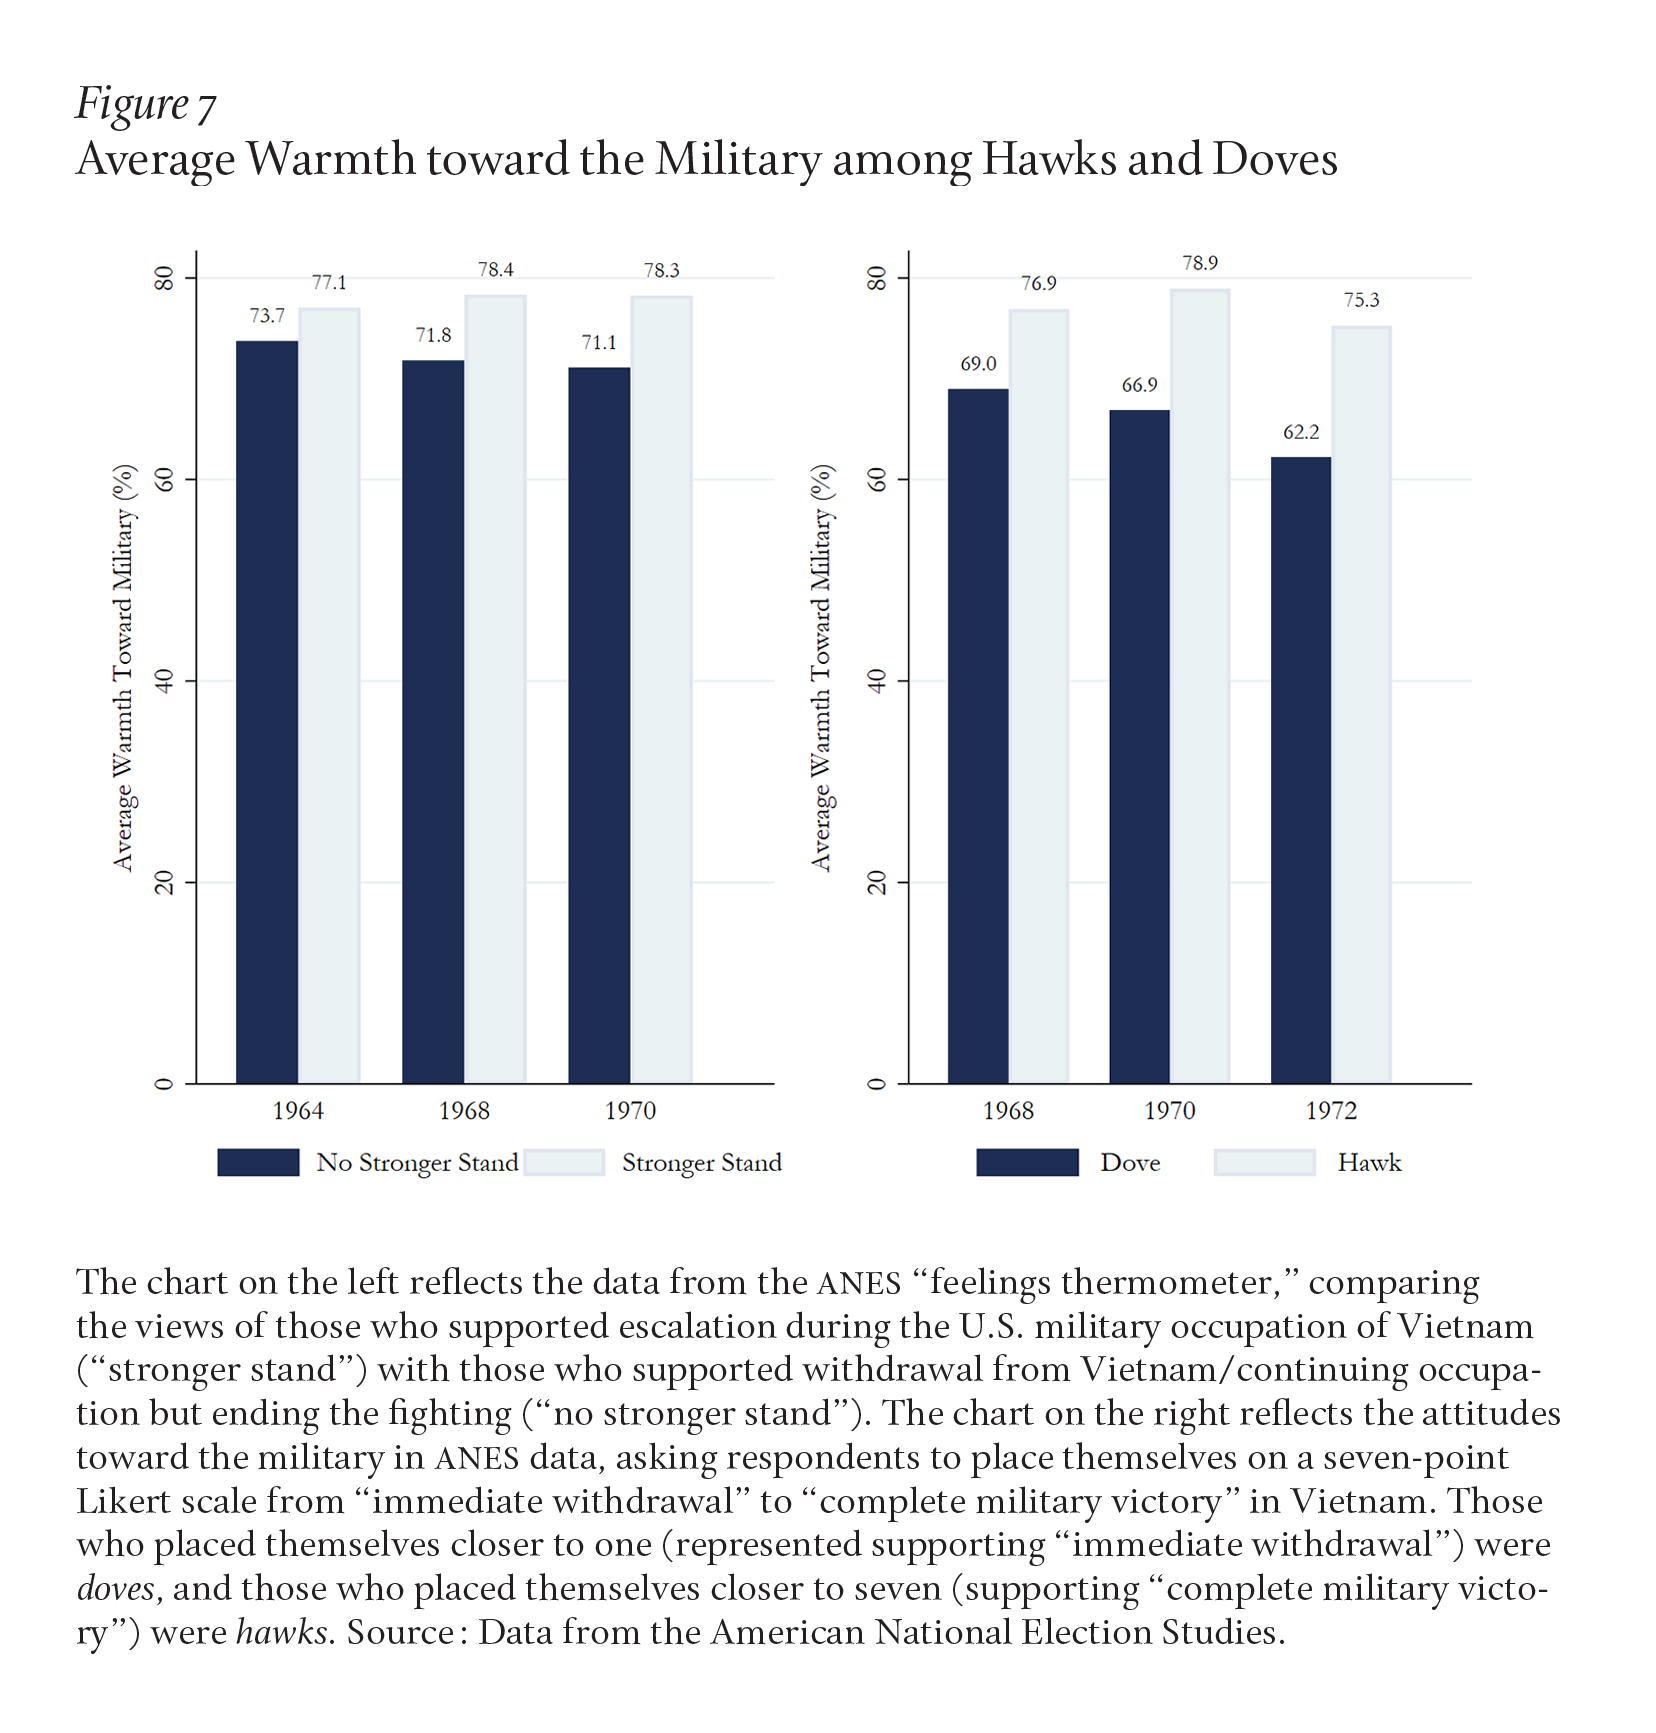 Figure 7 shows that hawkish attitudes and preferences for escalatory war strategies in Vietnam are linked with greater warmth toward the military.